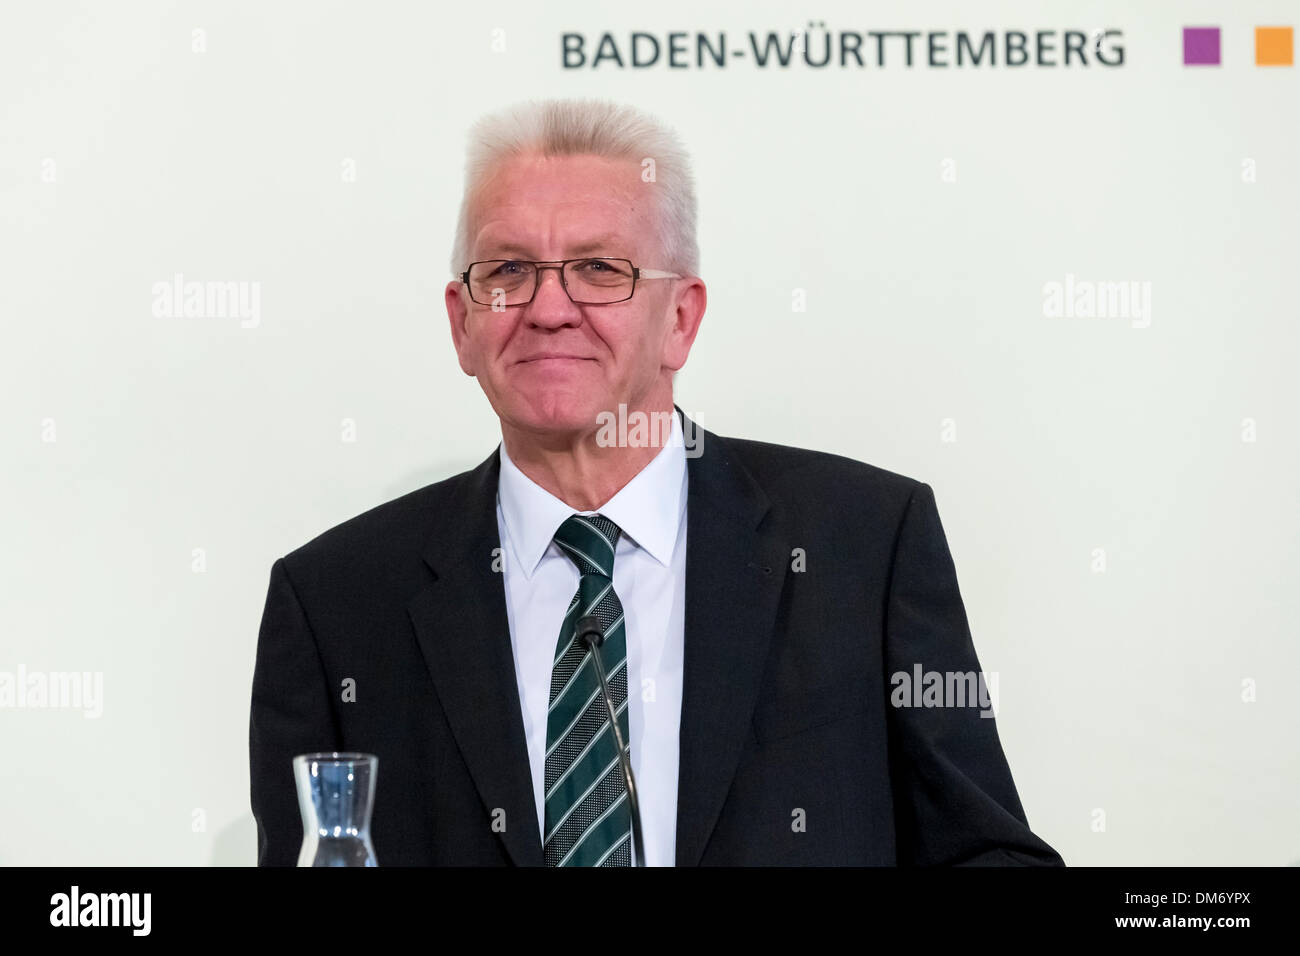 Berlin, Germany. December 12th, 2013. Press Conference with Prime Minister Kretschmann, Prime Minister Lieberknecht and Prime Minister Albig after Meeting/Conference of the heads of government of the Germany Federal states at the representation of Baden-Wuerttemberg in Berlin. / Picture: Winfried Kretschmann (Green), Old President of the Conference of Prime Ministers and Minister-President of Baden-Württemberg. Credit:  Reynaldo Chaib Paganelli/Alamy Live News Stock Photo